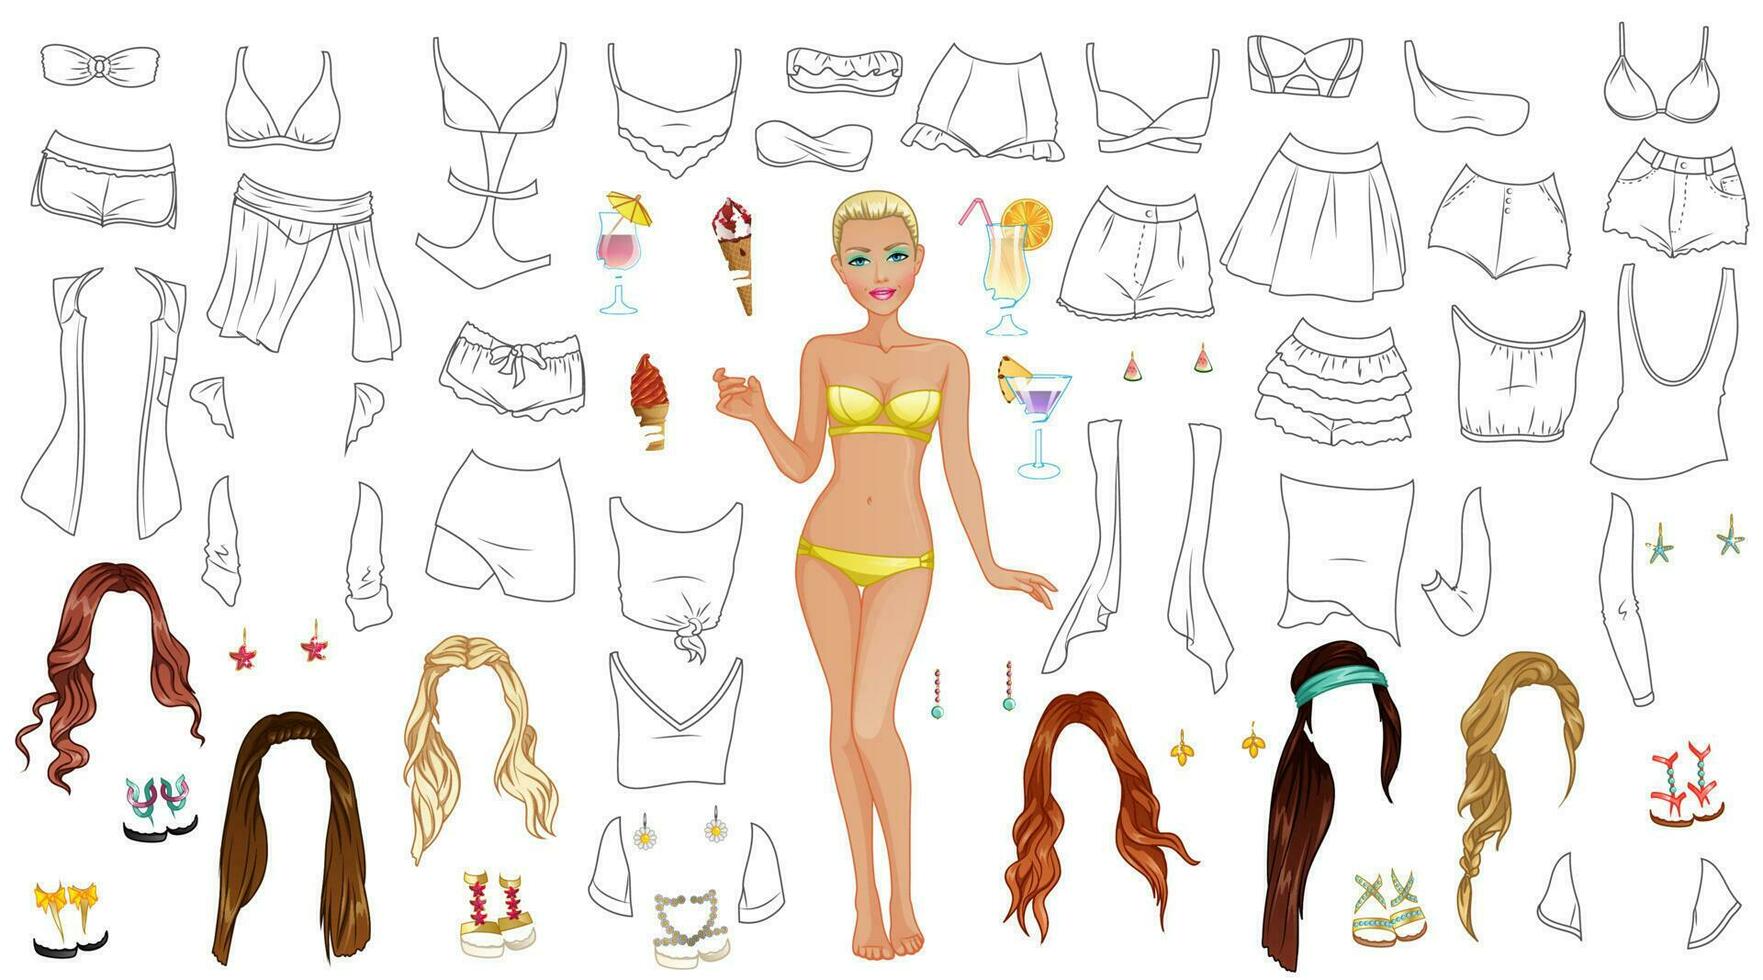 Spring Break Coloring Paper Doll with Swimsuits, Hairstyles and Accessories. Vector Illustration